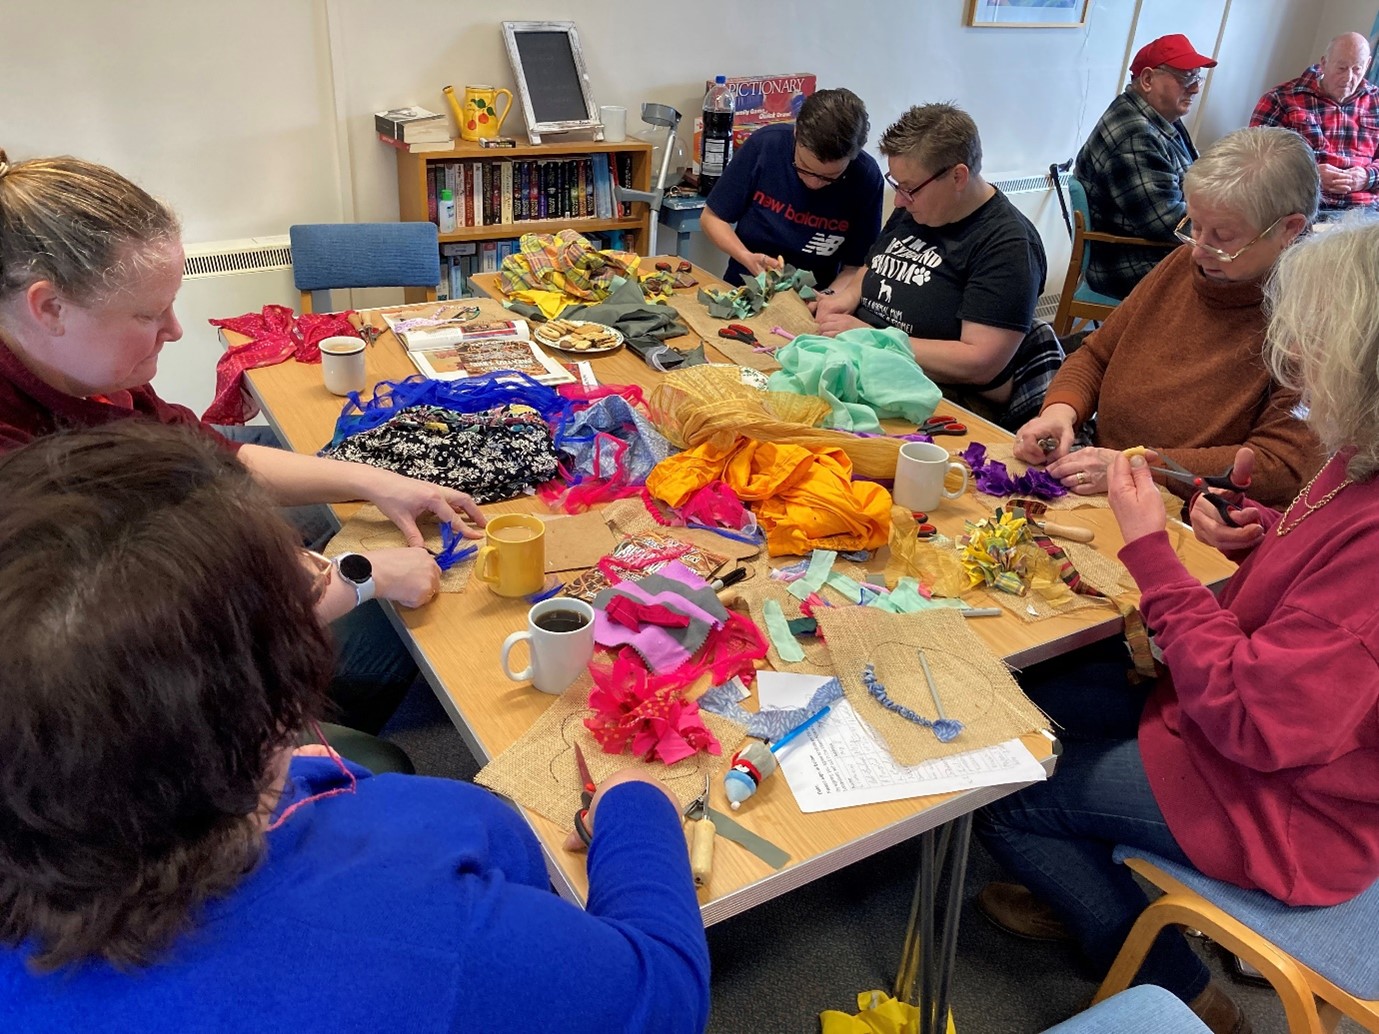 a group of people creating crafts in a community hub